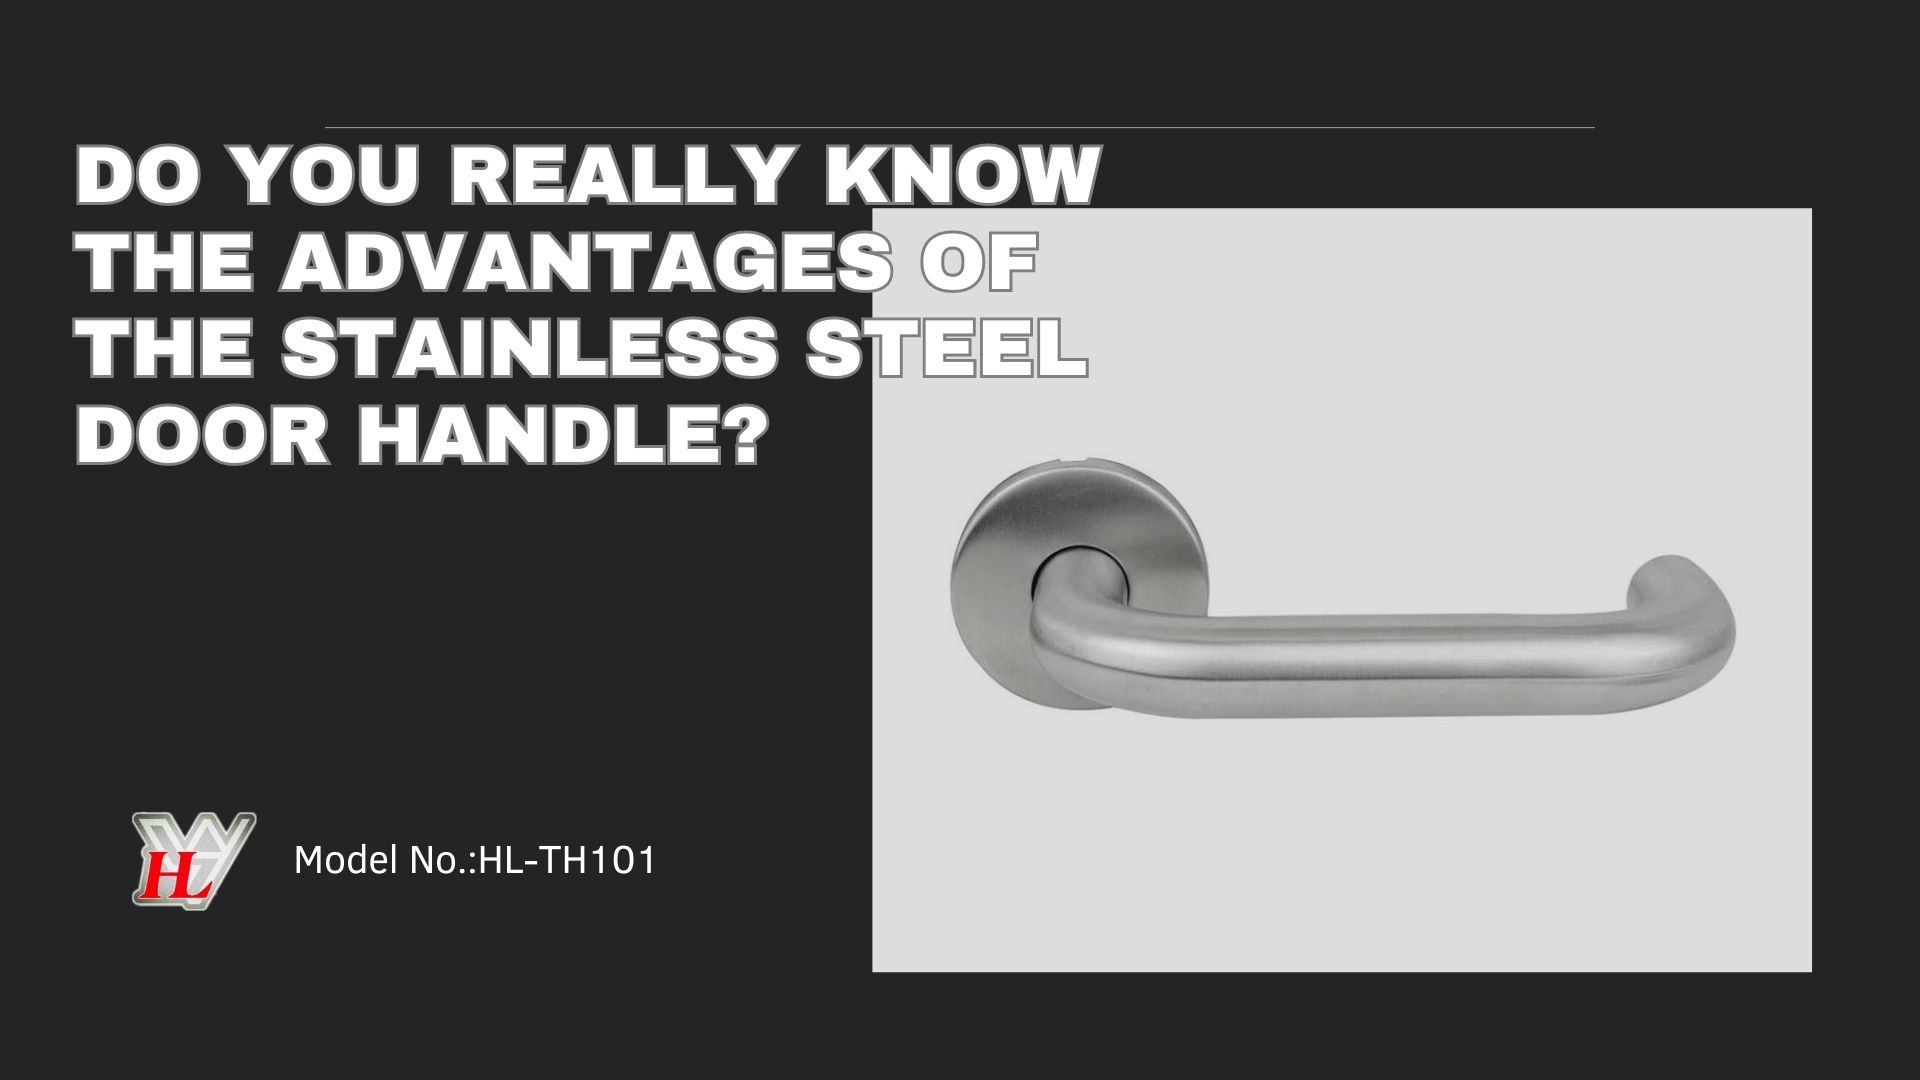 Do you really know the advantages of the stainless steel door handle?